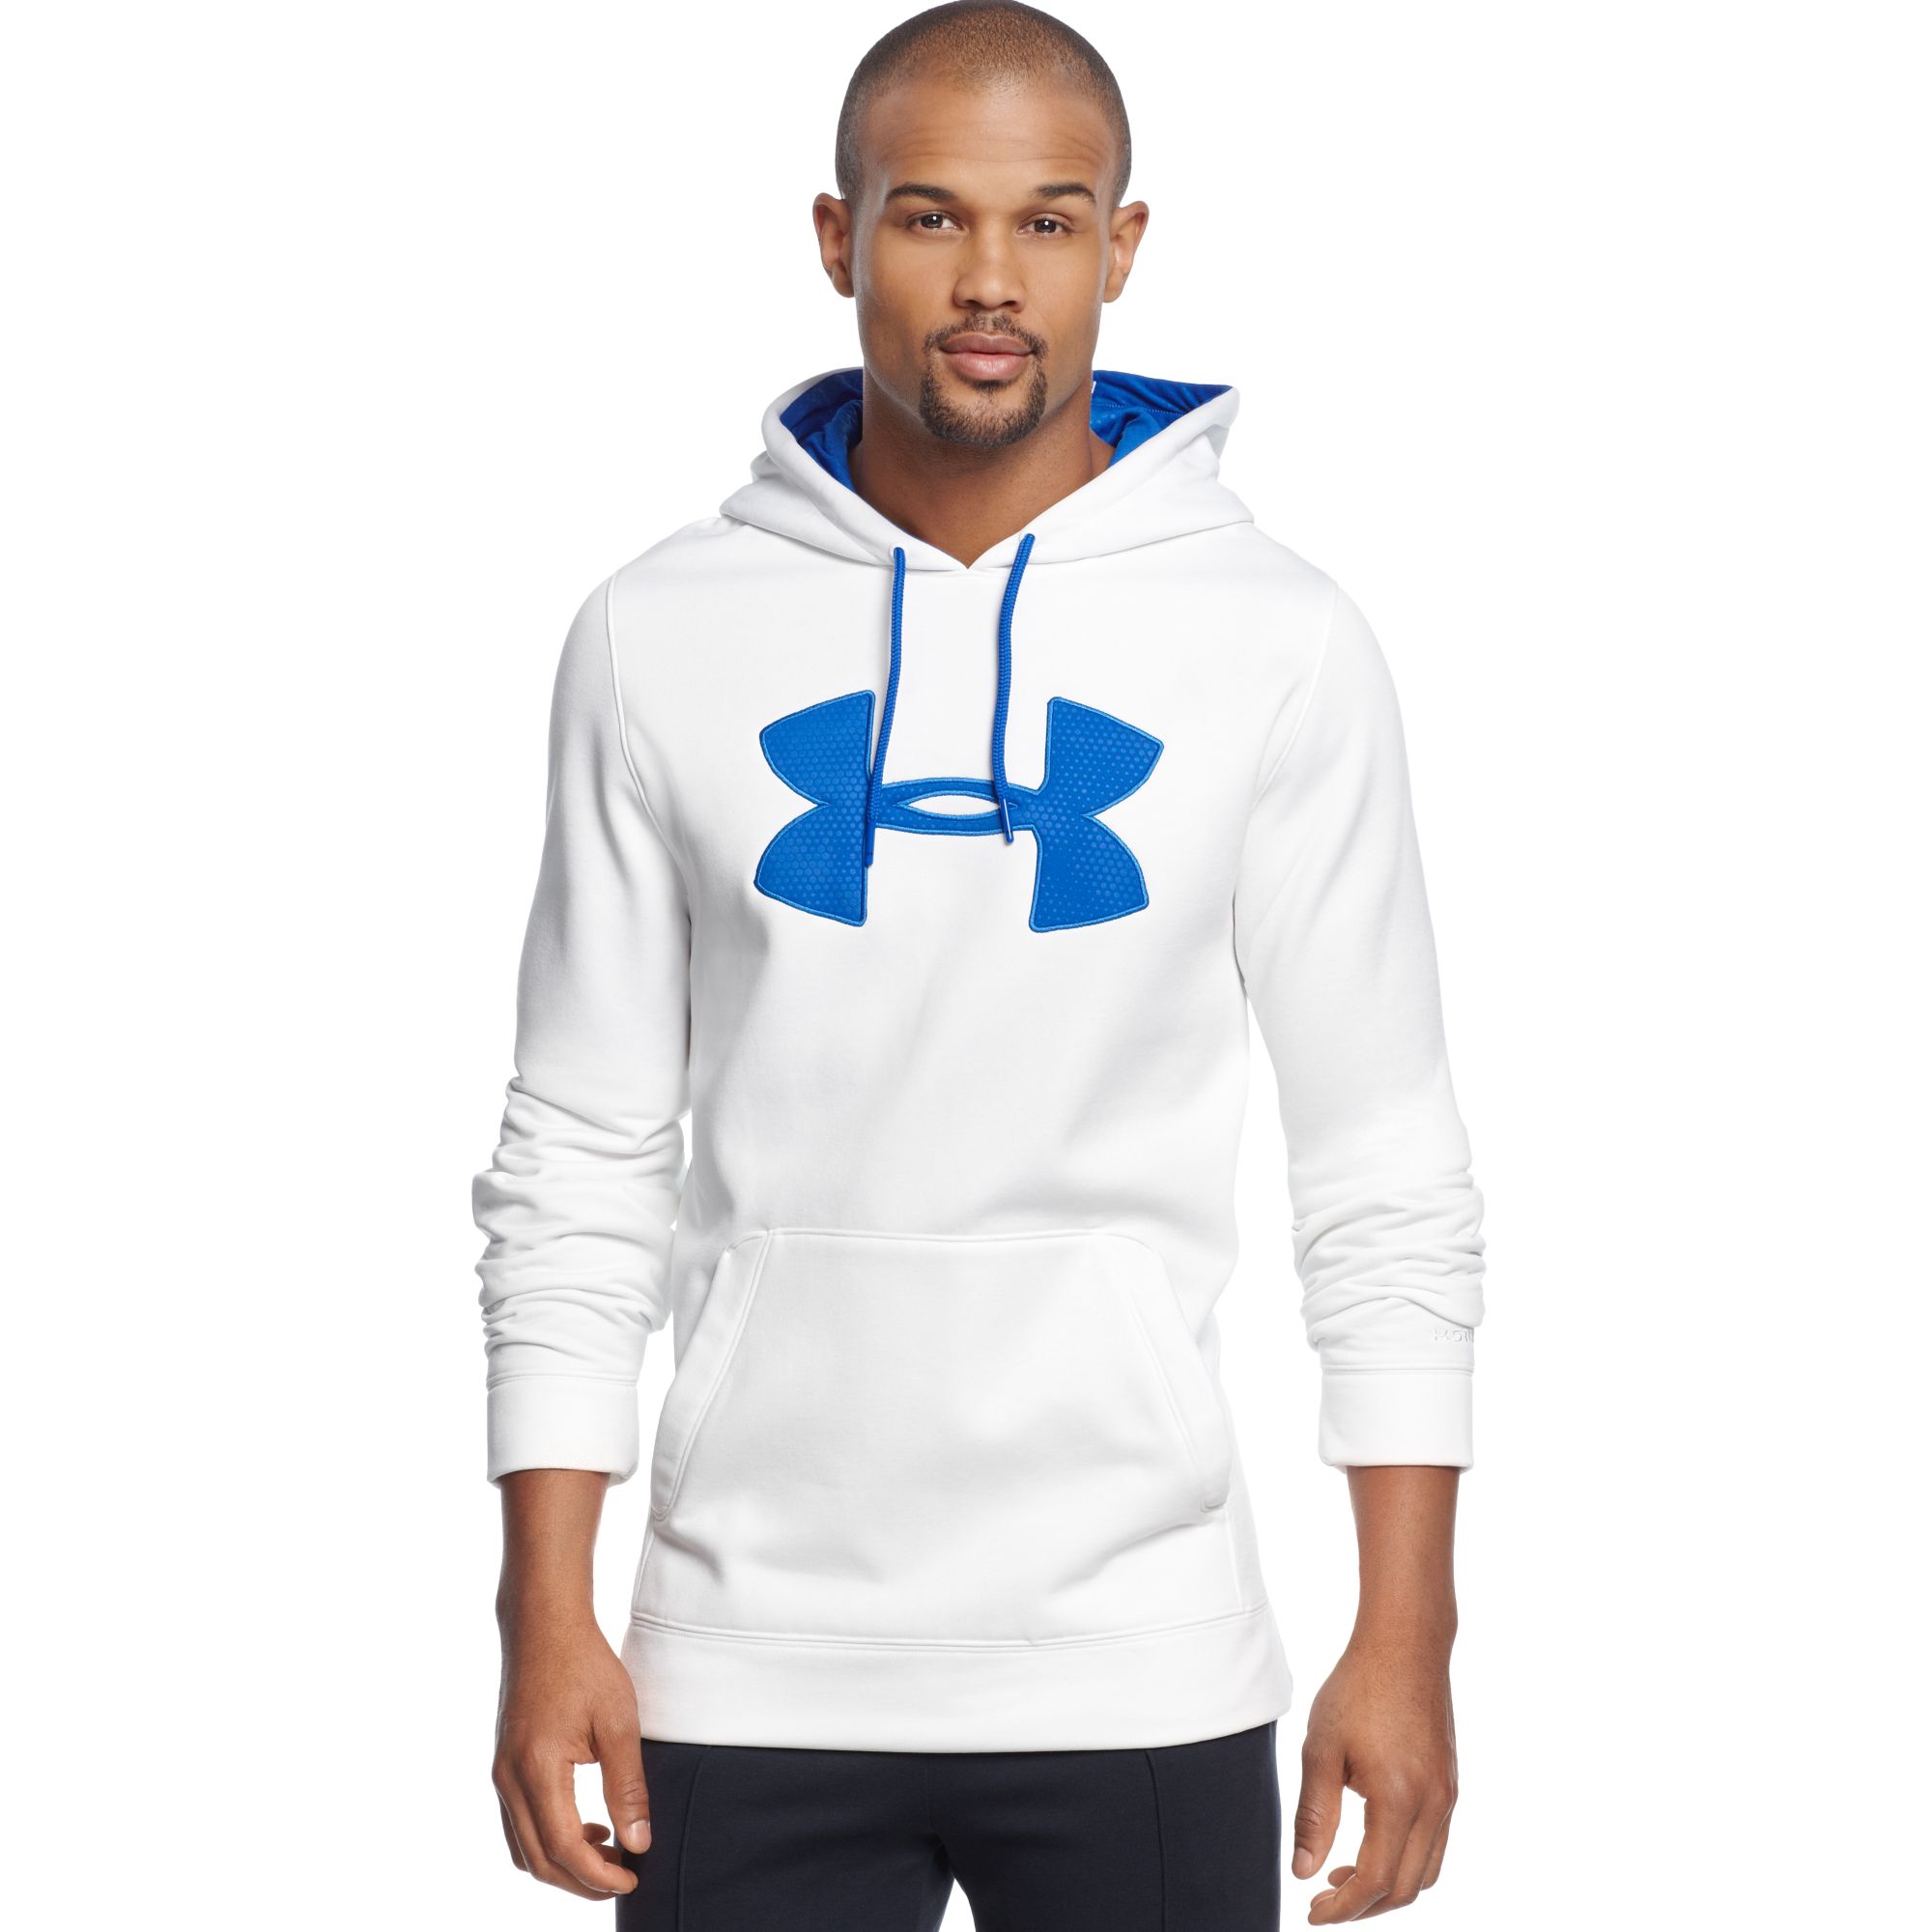 White Under Armour Storm Hoodie Top Sellers - www.puzzlewood.net 1696577587